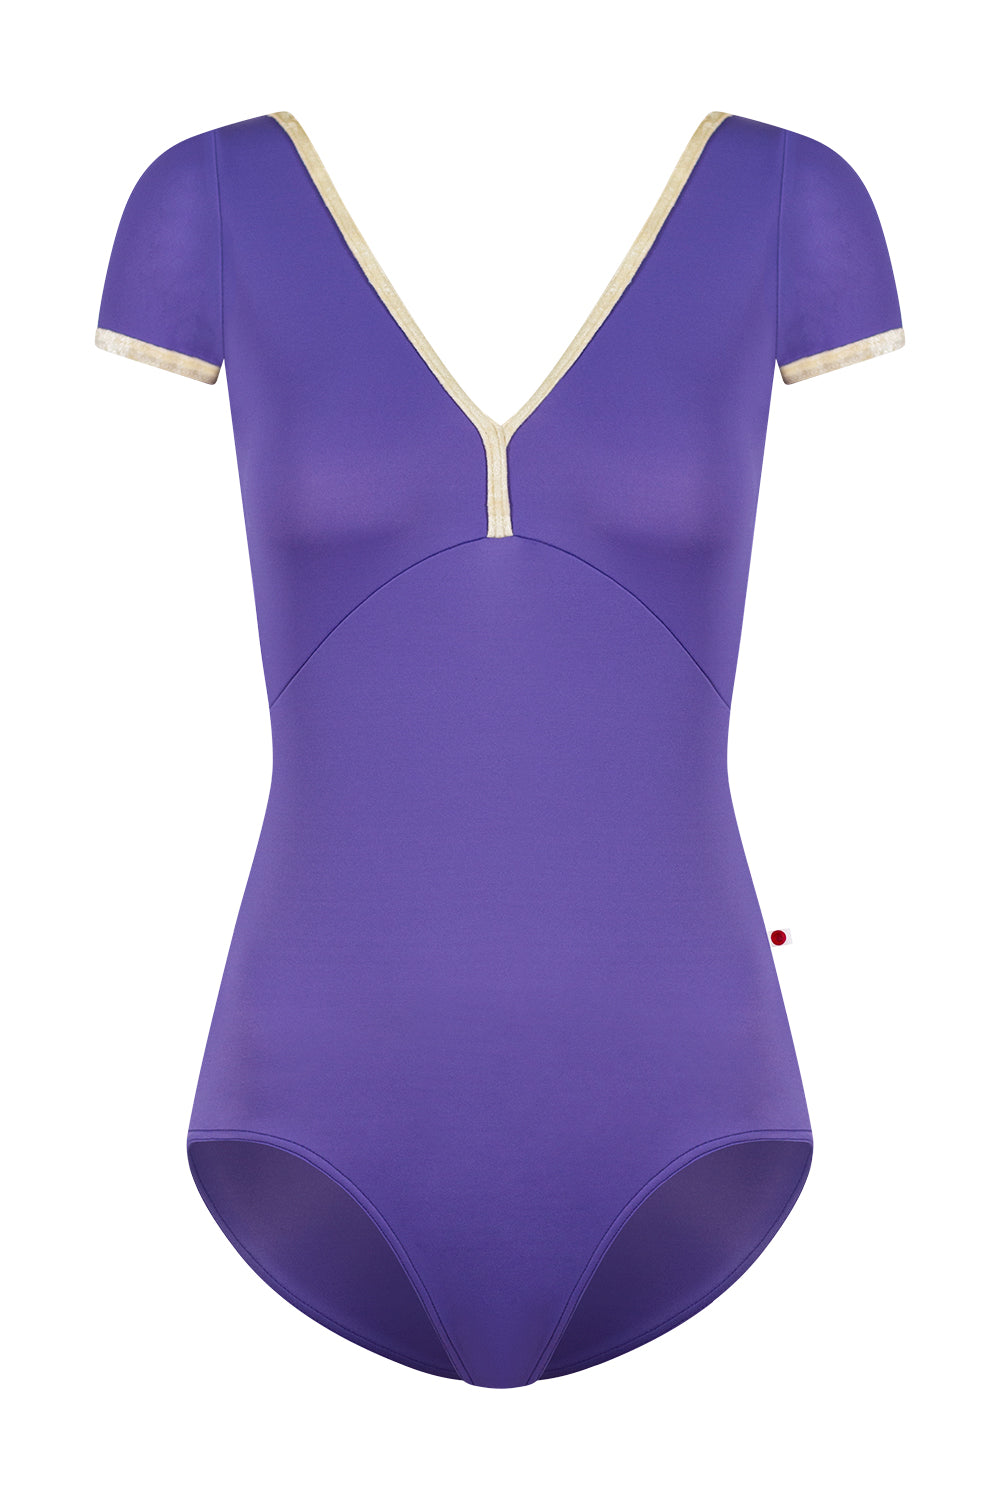 Alicia leotard in T-Wisteria body color with CV-Vanilla trim color and short sleeves